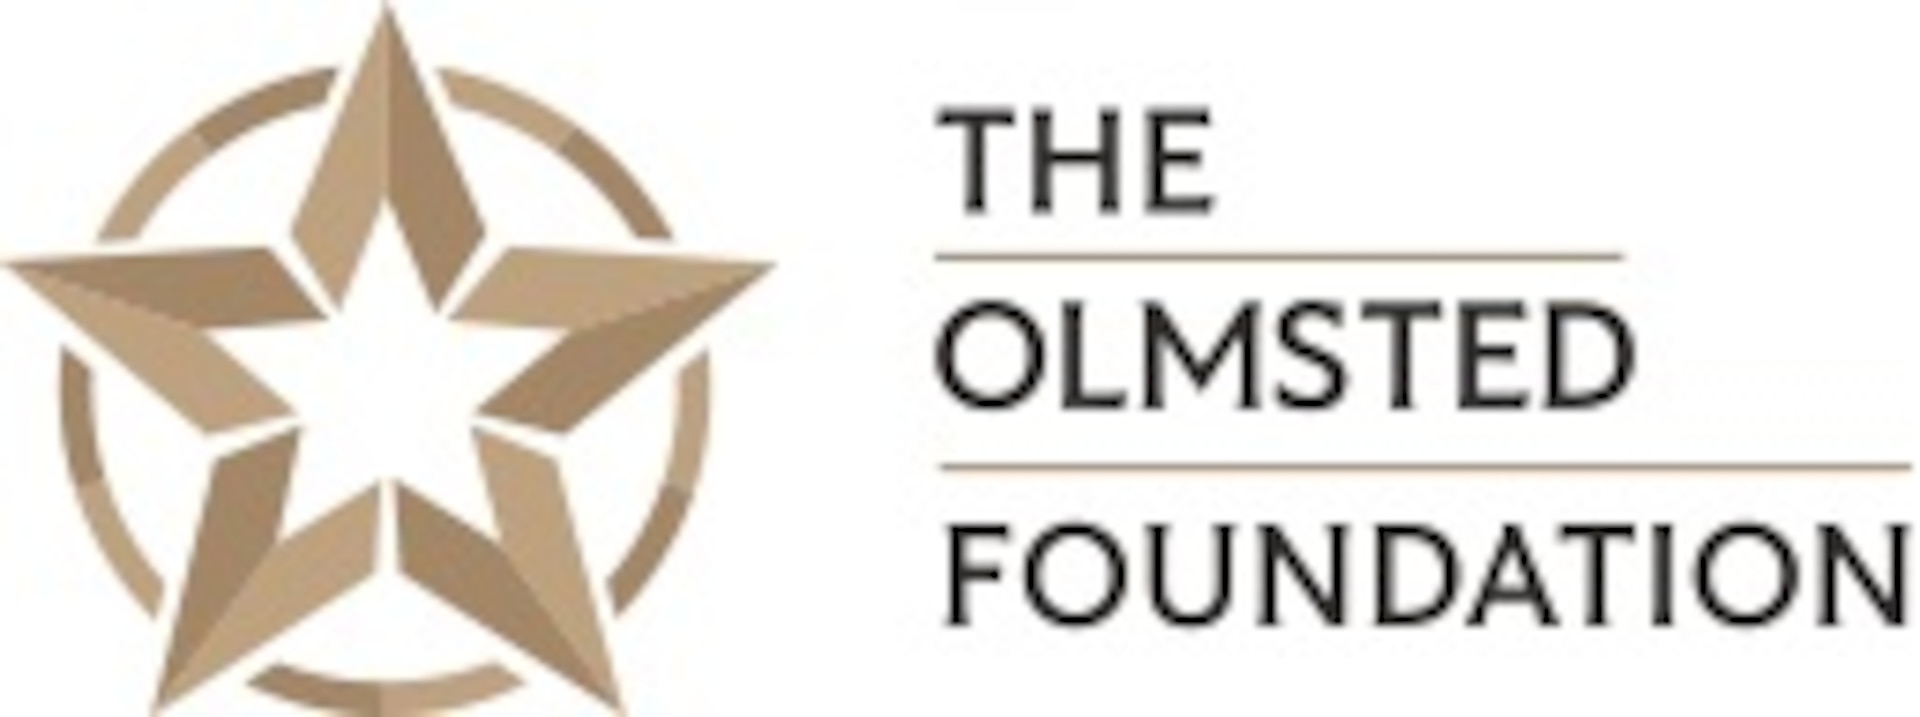 The Olmsted Foundation offers outstanding young military officers the opportunity to become fluent in a foreign language, pursue graduate studies at an overseas university, and develop an understanding of foreign cultures.